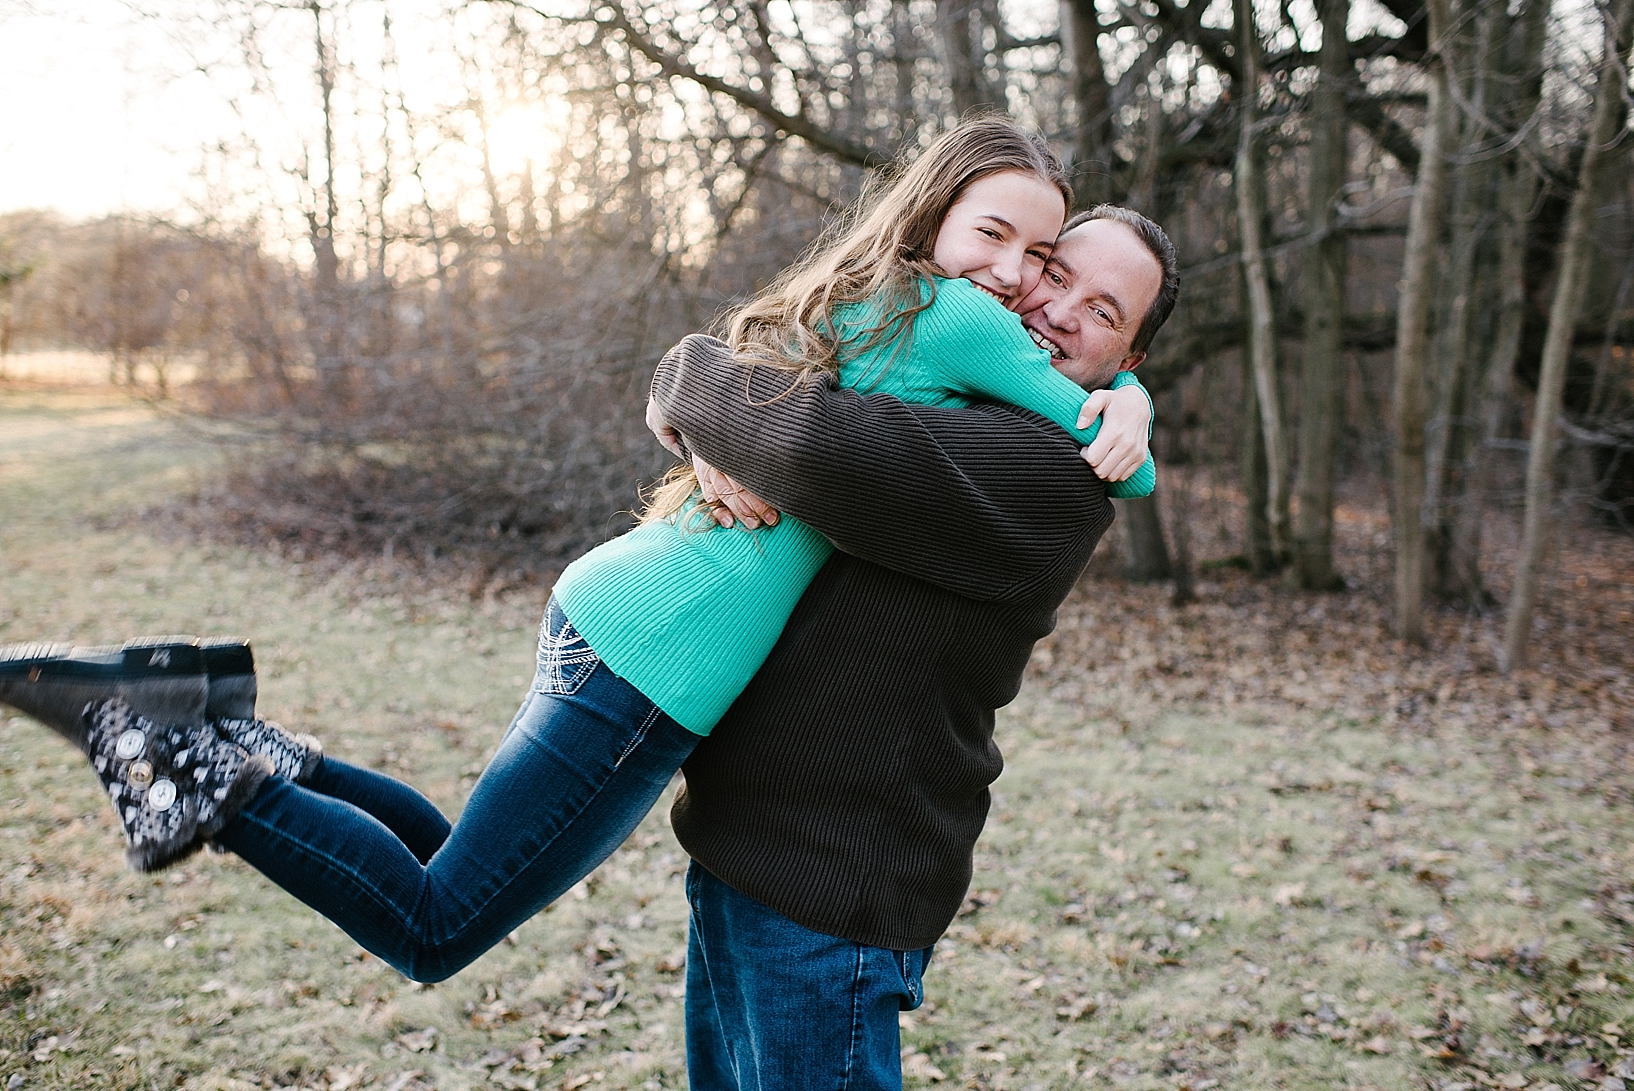 dad in brown shirt and jeans picking up teen daughter in teal shirt and hugging